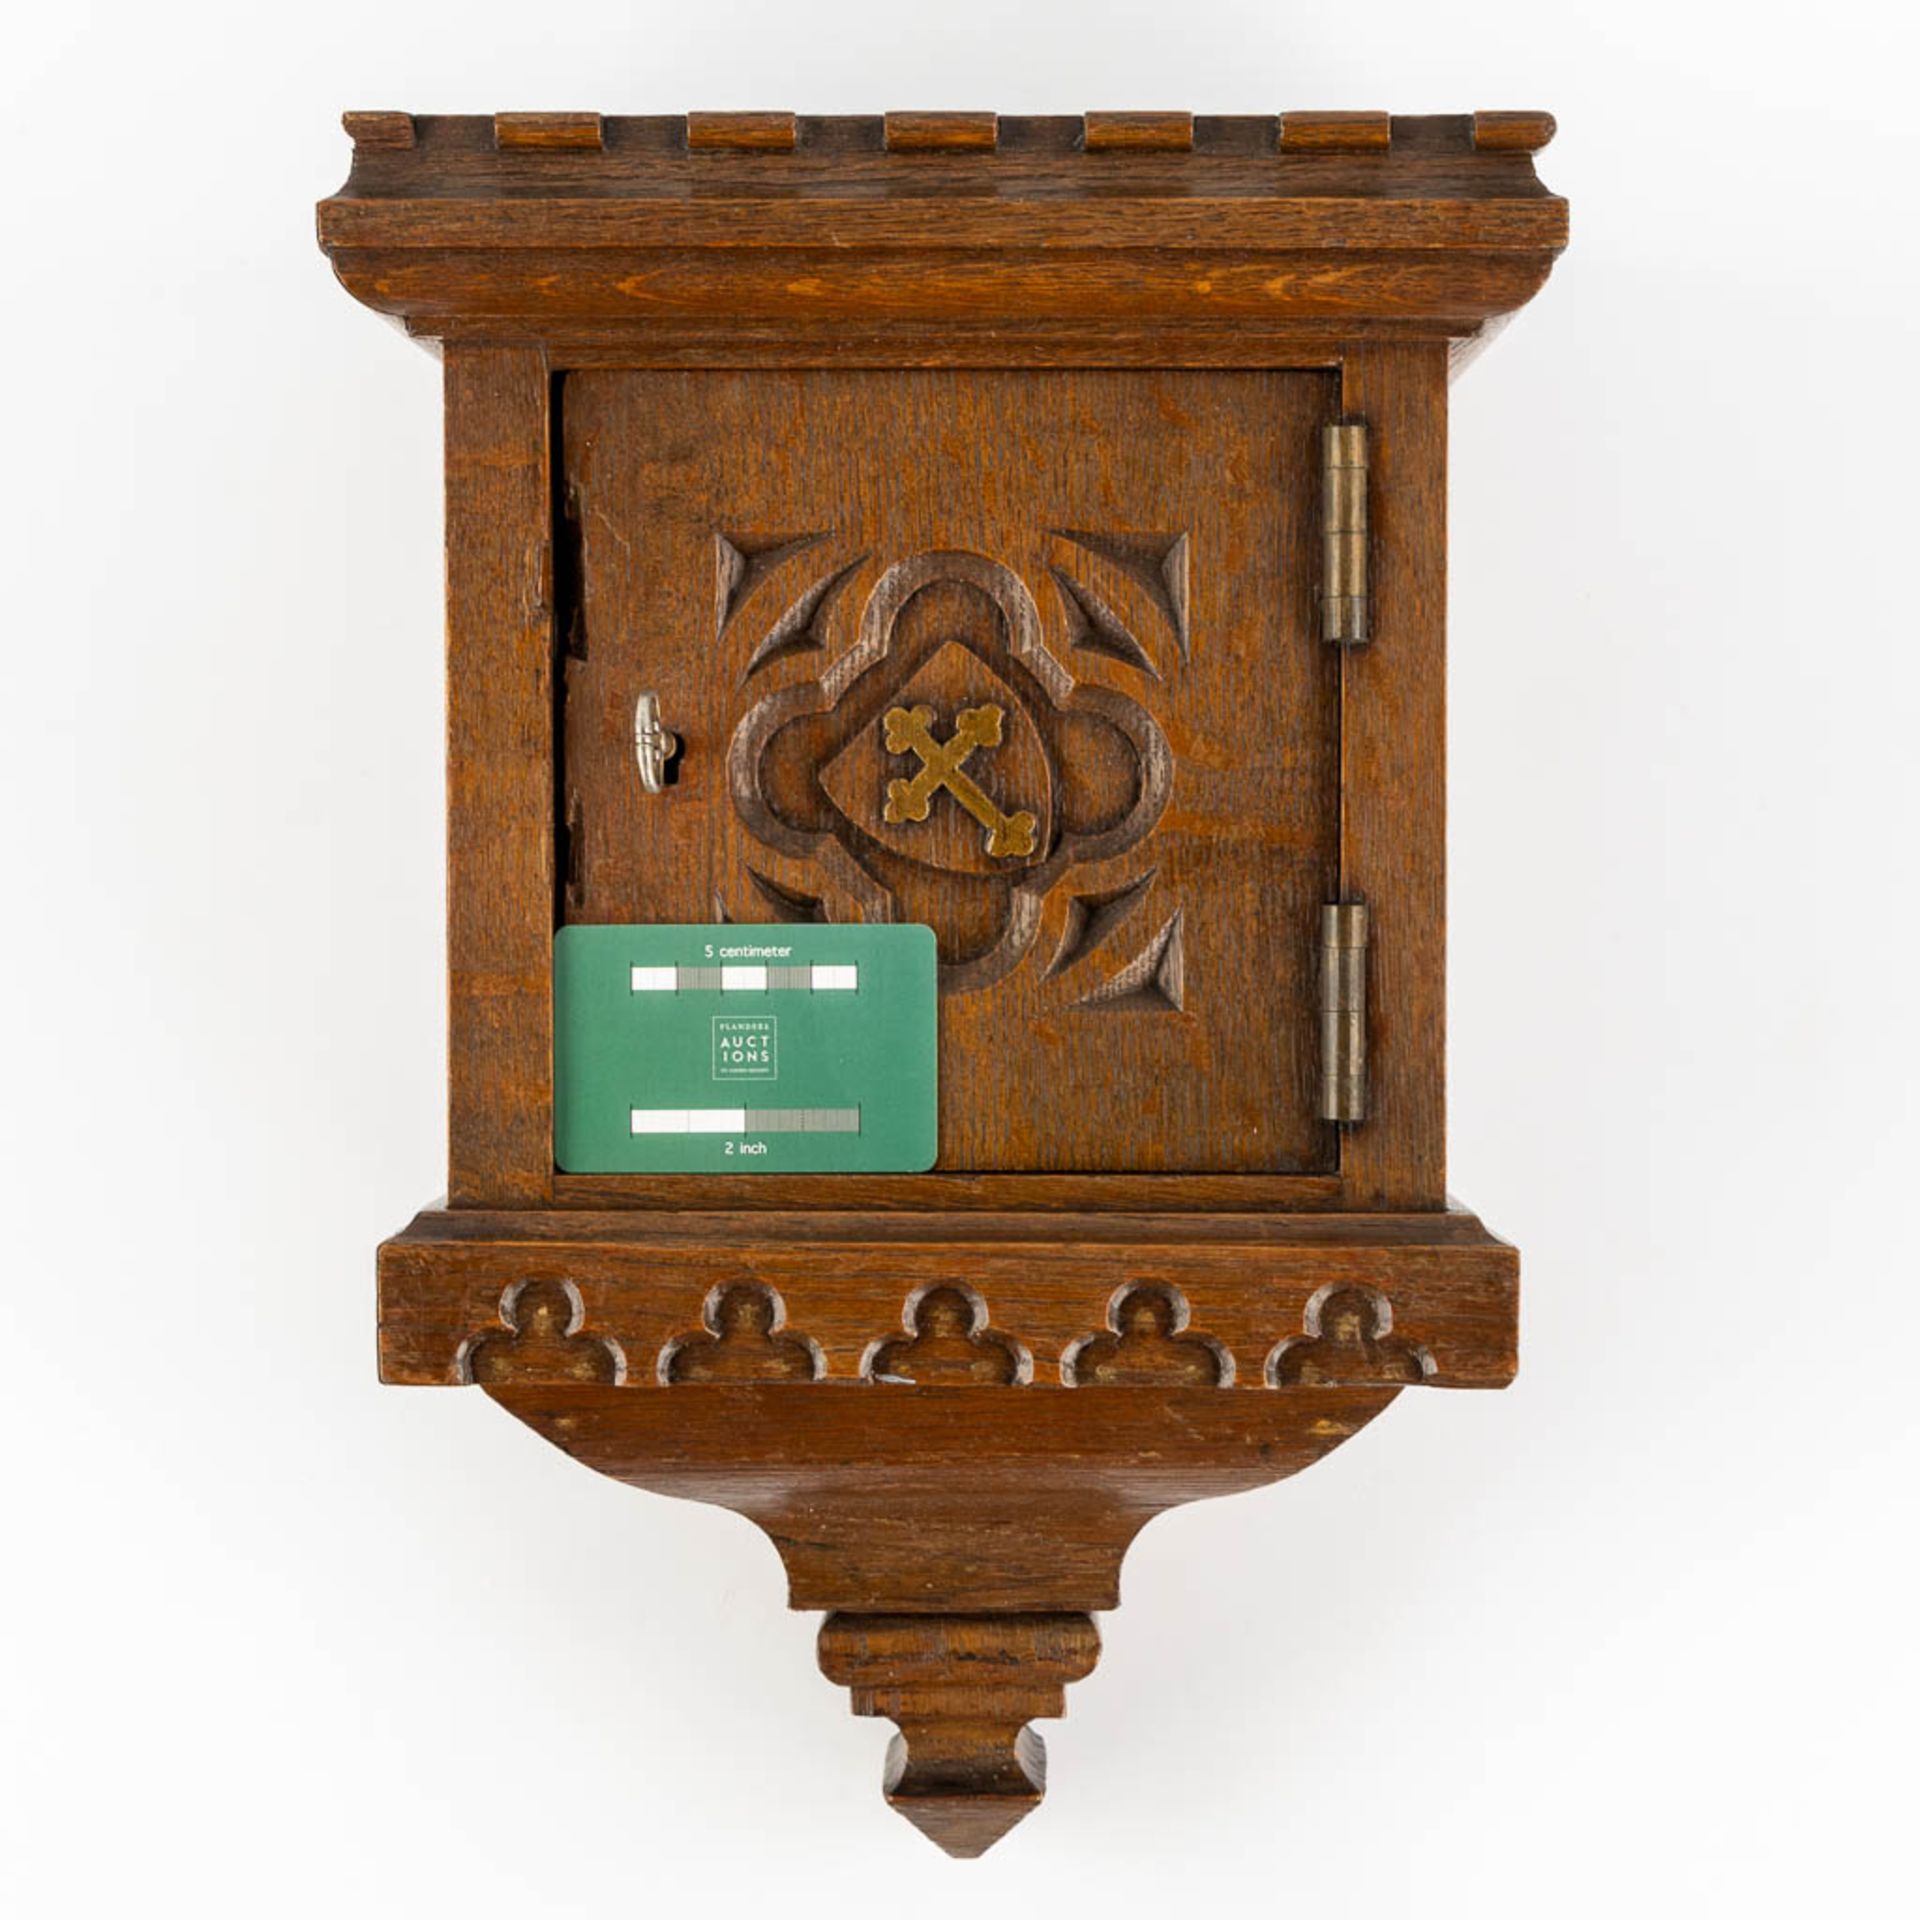 An Offertory or Poor box, sculptured oak, gothic revival. (L:20 x W:27 x H:42 cm) - Image 2 of 11